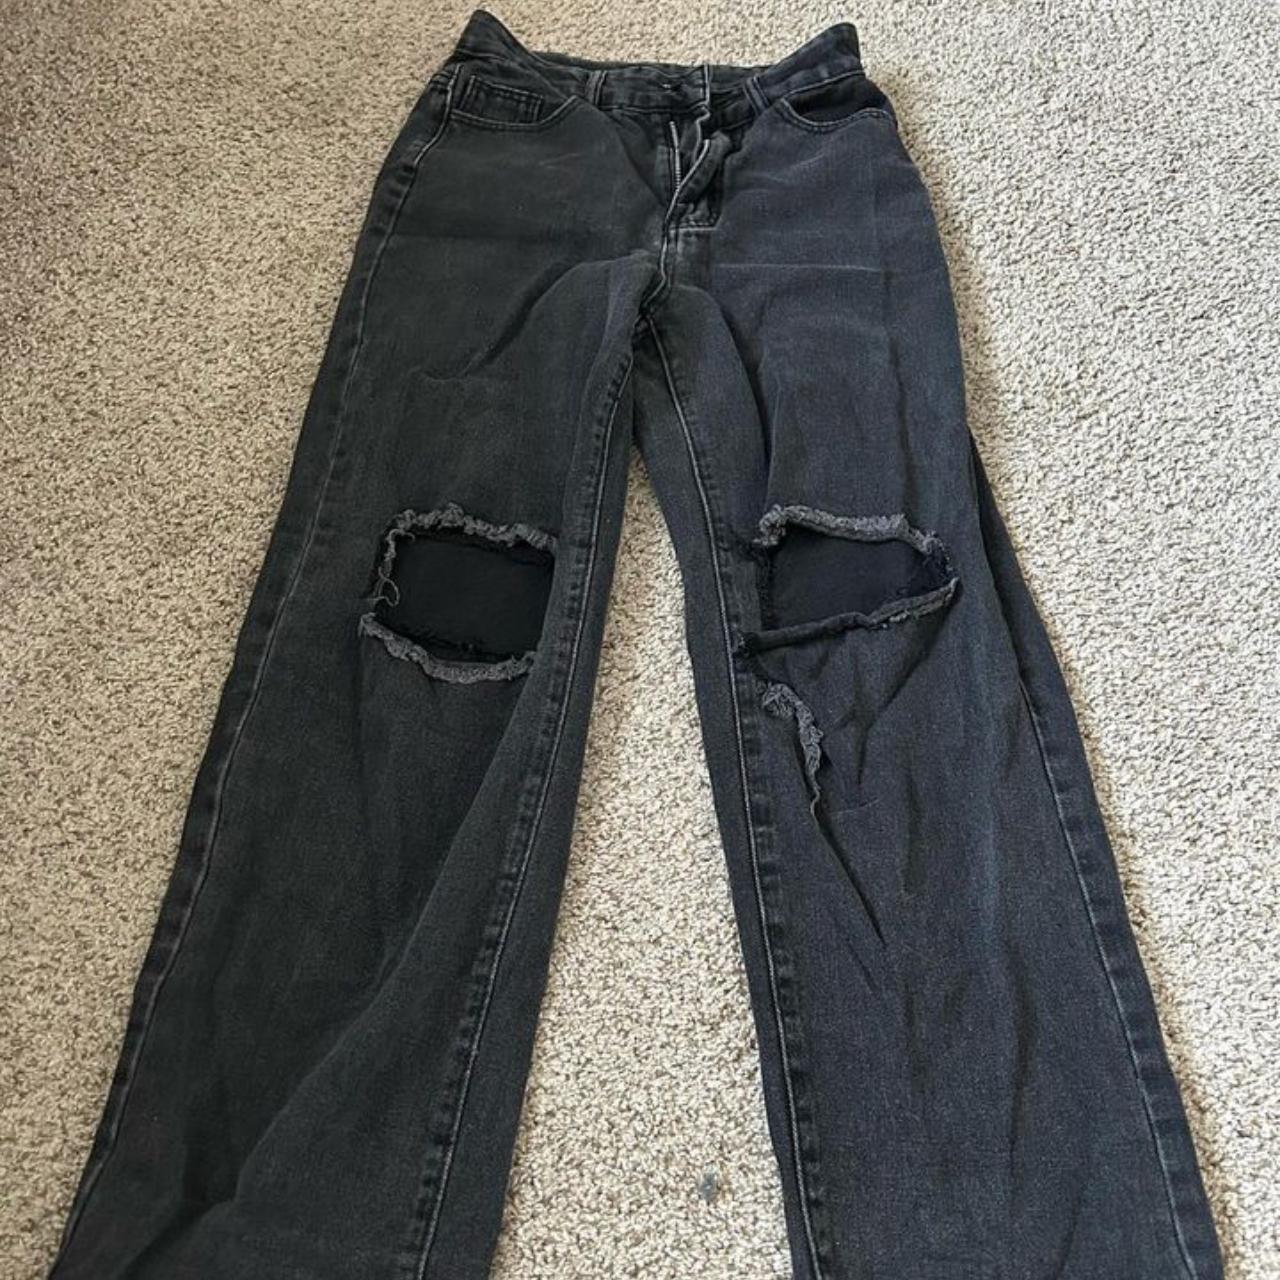 Baggy Black Ripped Jeans -Good condition, rarely... - Depop